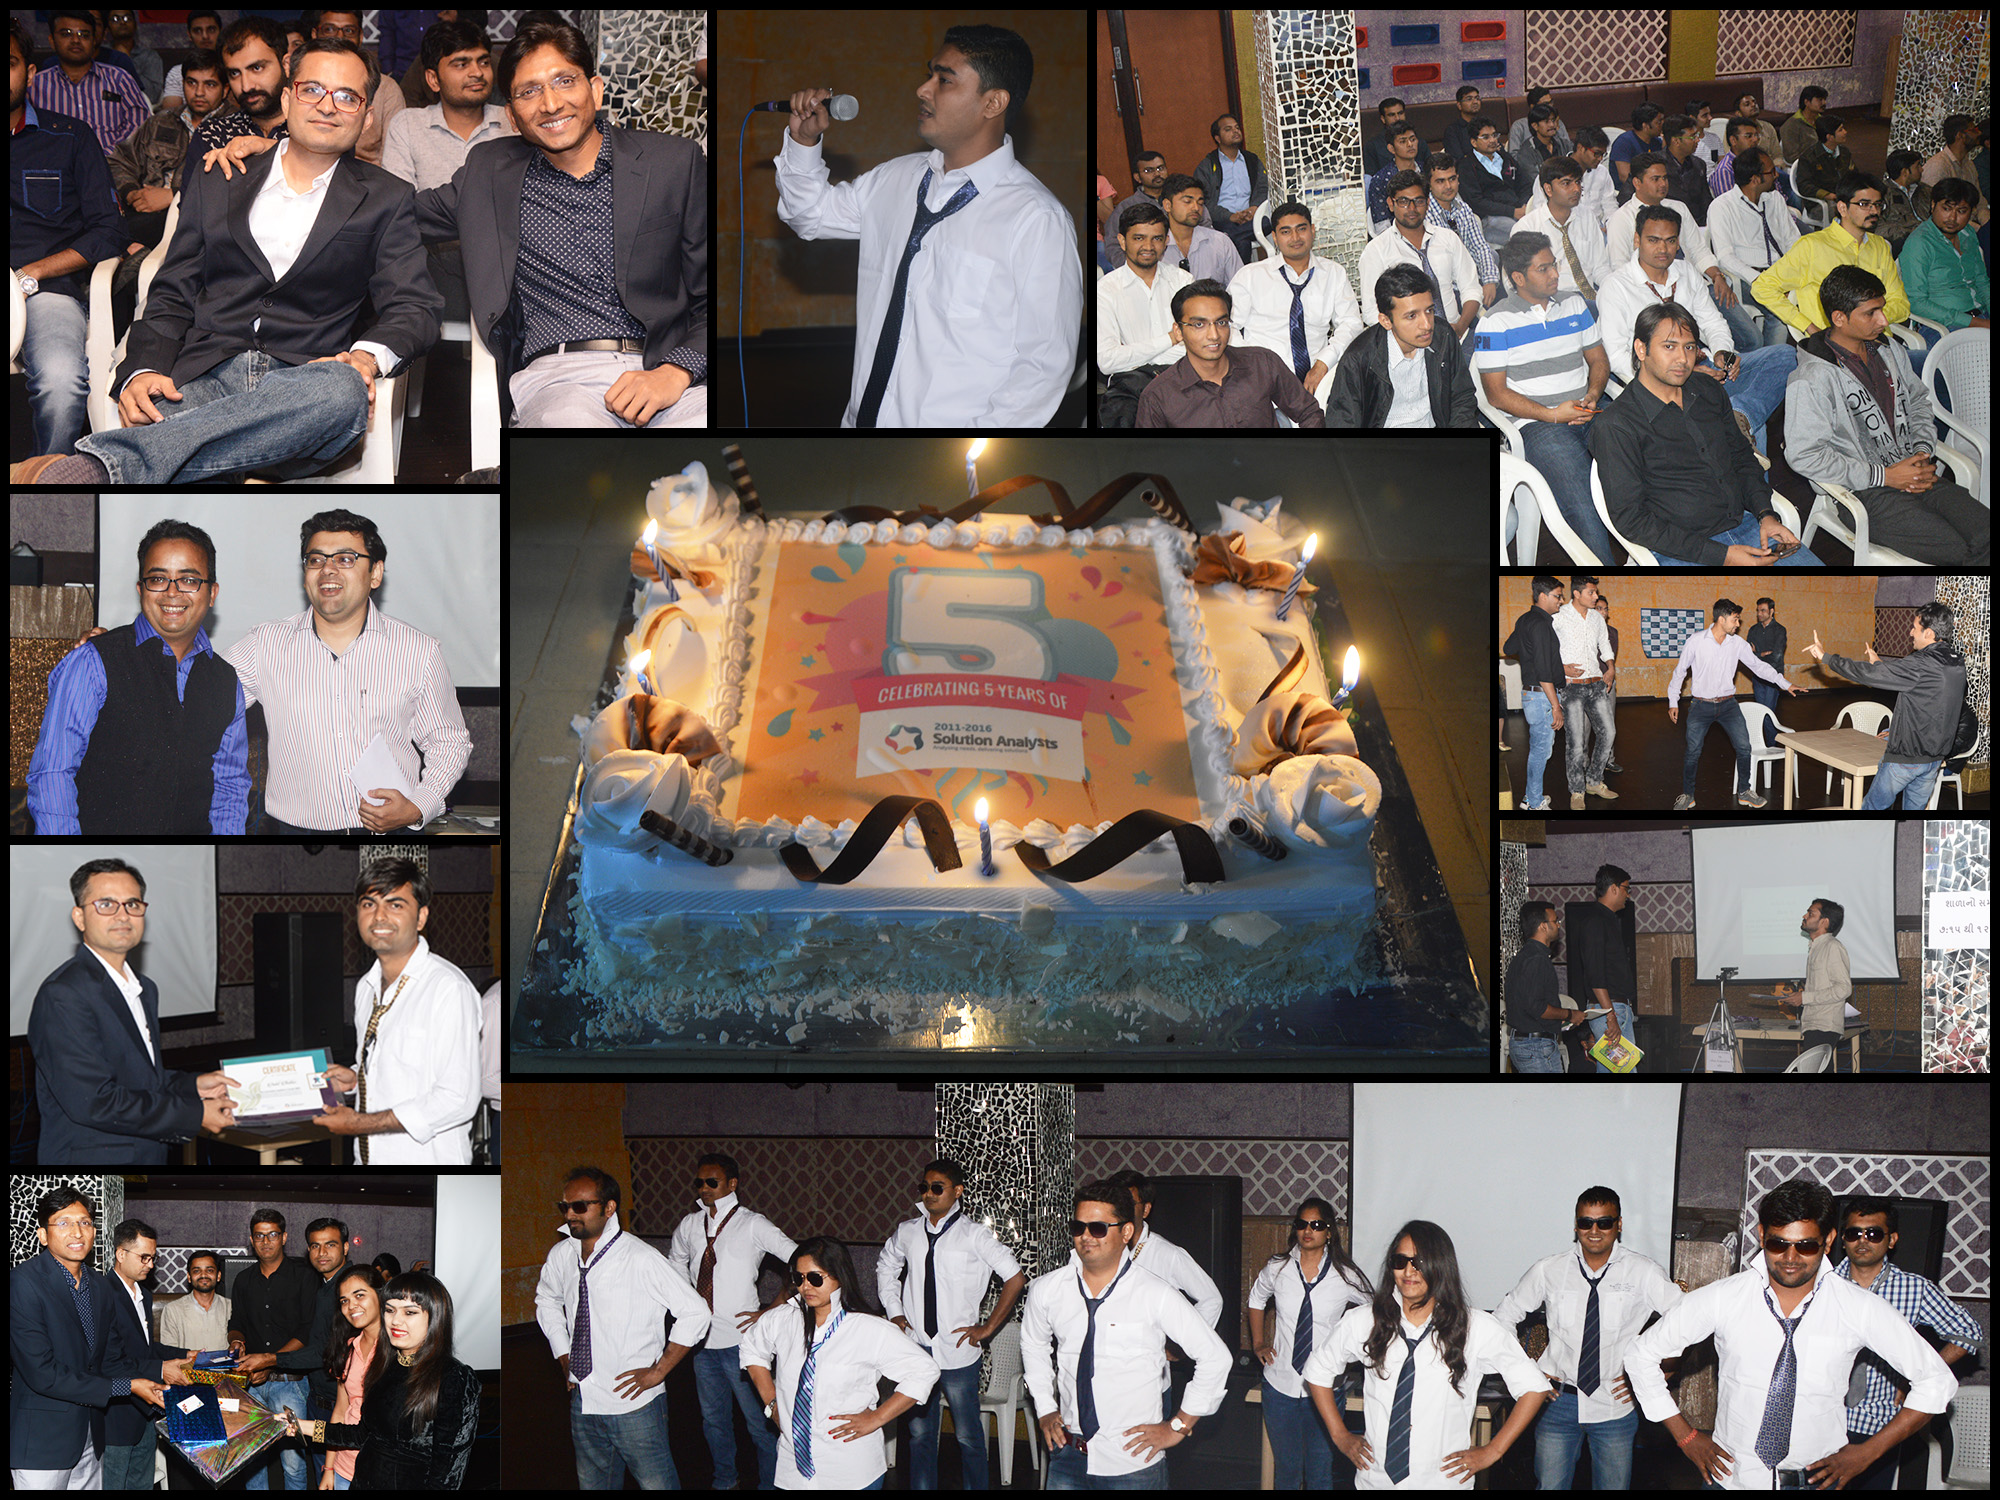 Grand Annual Event Celebrated by Solution Analysts for completing Glorious 5 Years